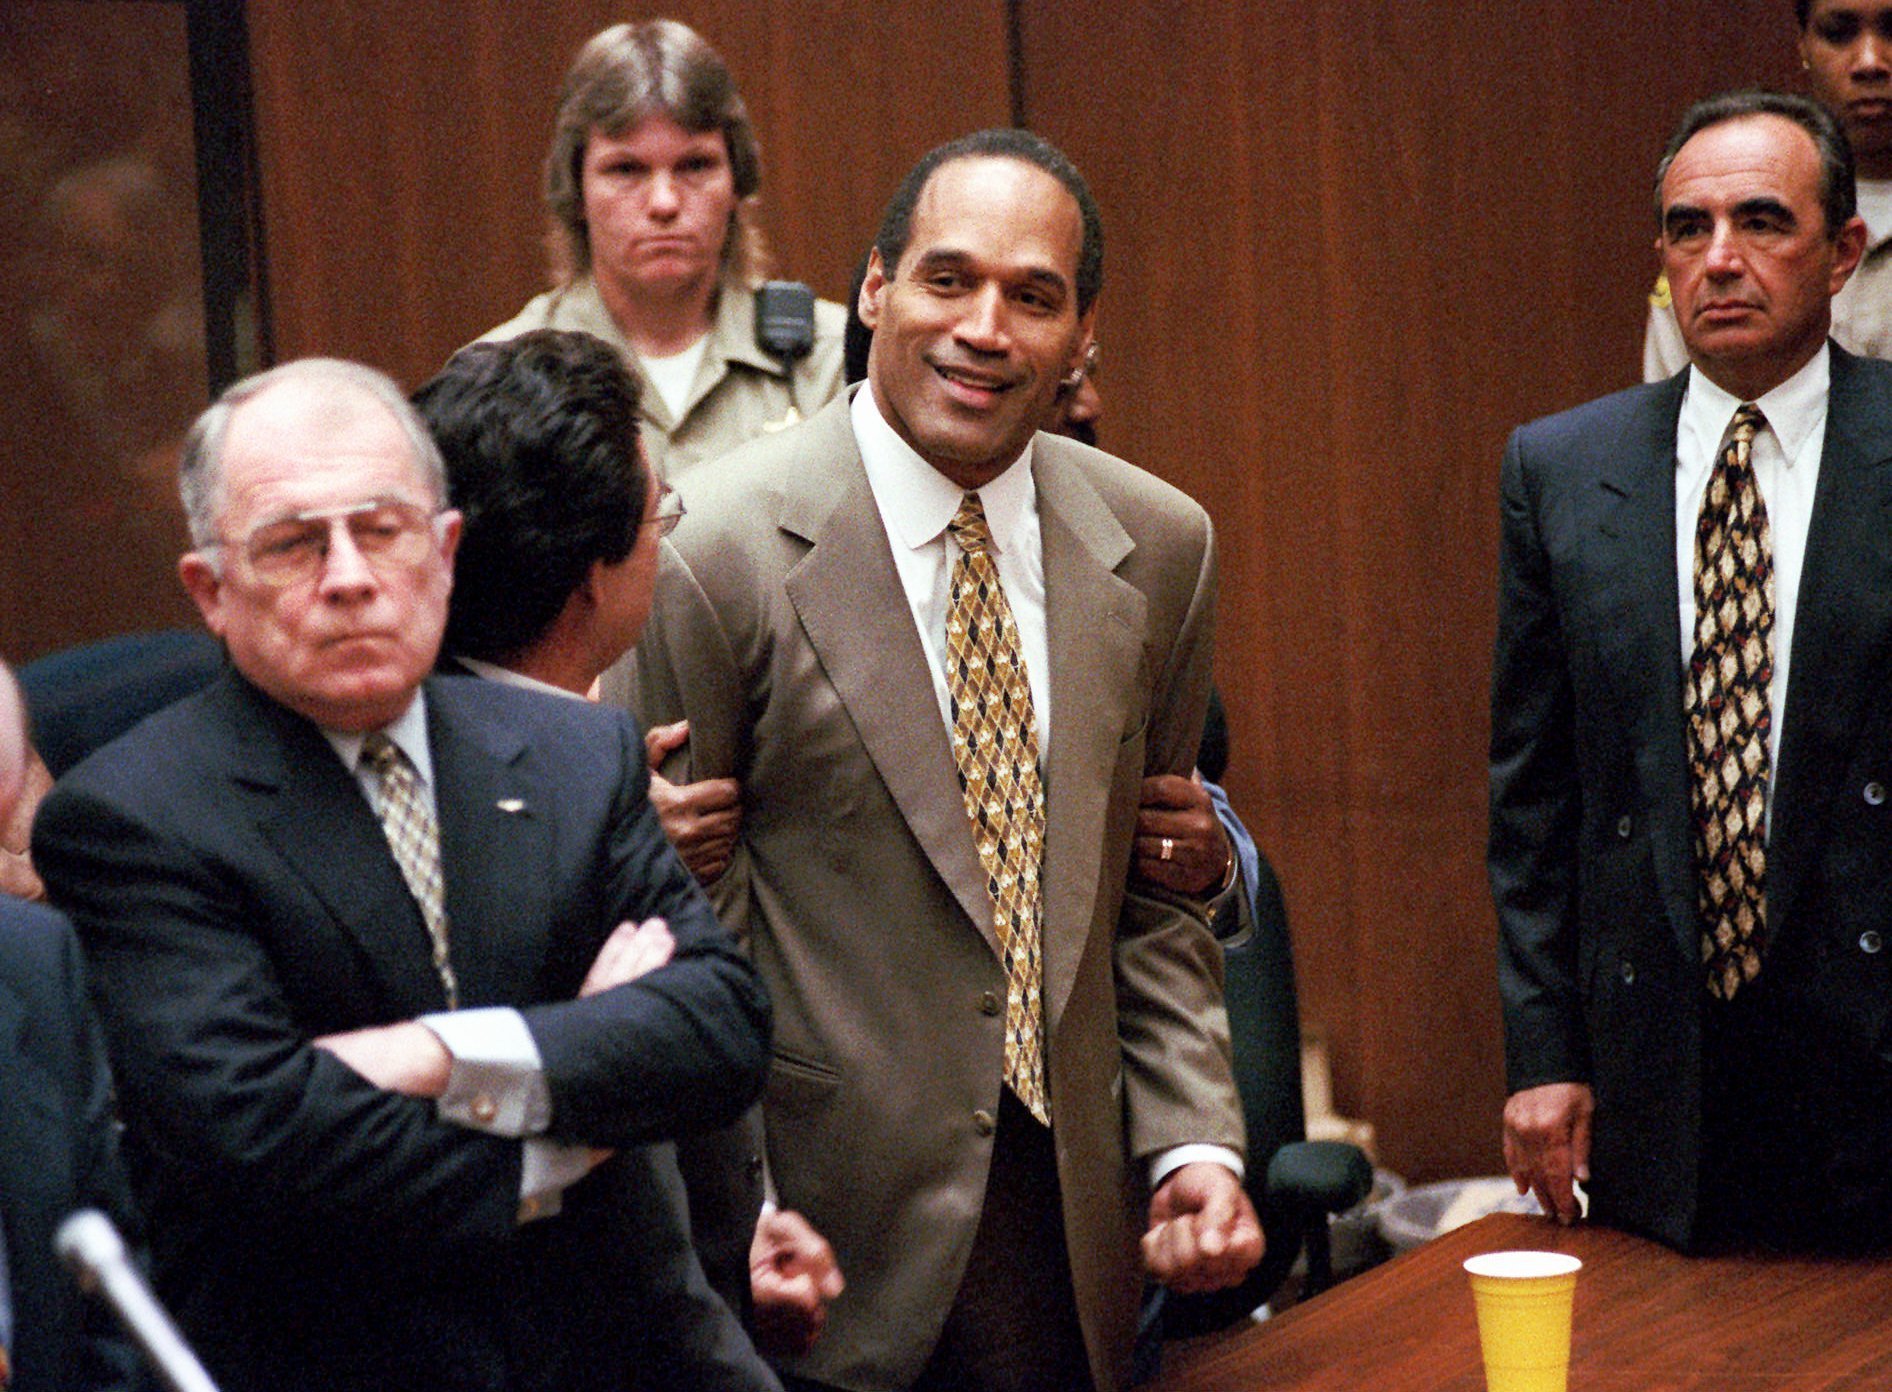 "In this Oct. 3, 1995, file photo, O.J. Simpson, center, clenches his fists in victory after the jury said he was not guilty in the murders of his ex-wife Nicole Brown Simpson and her friend Ronald Goldman in a Los Angeles courtroom."